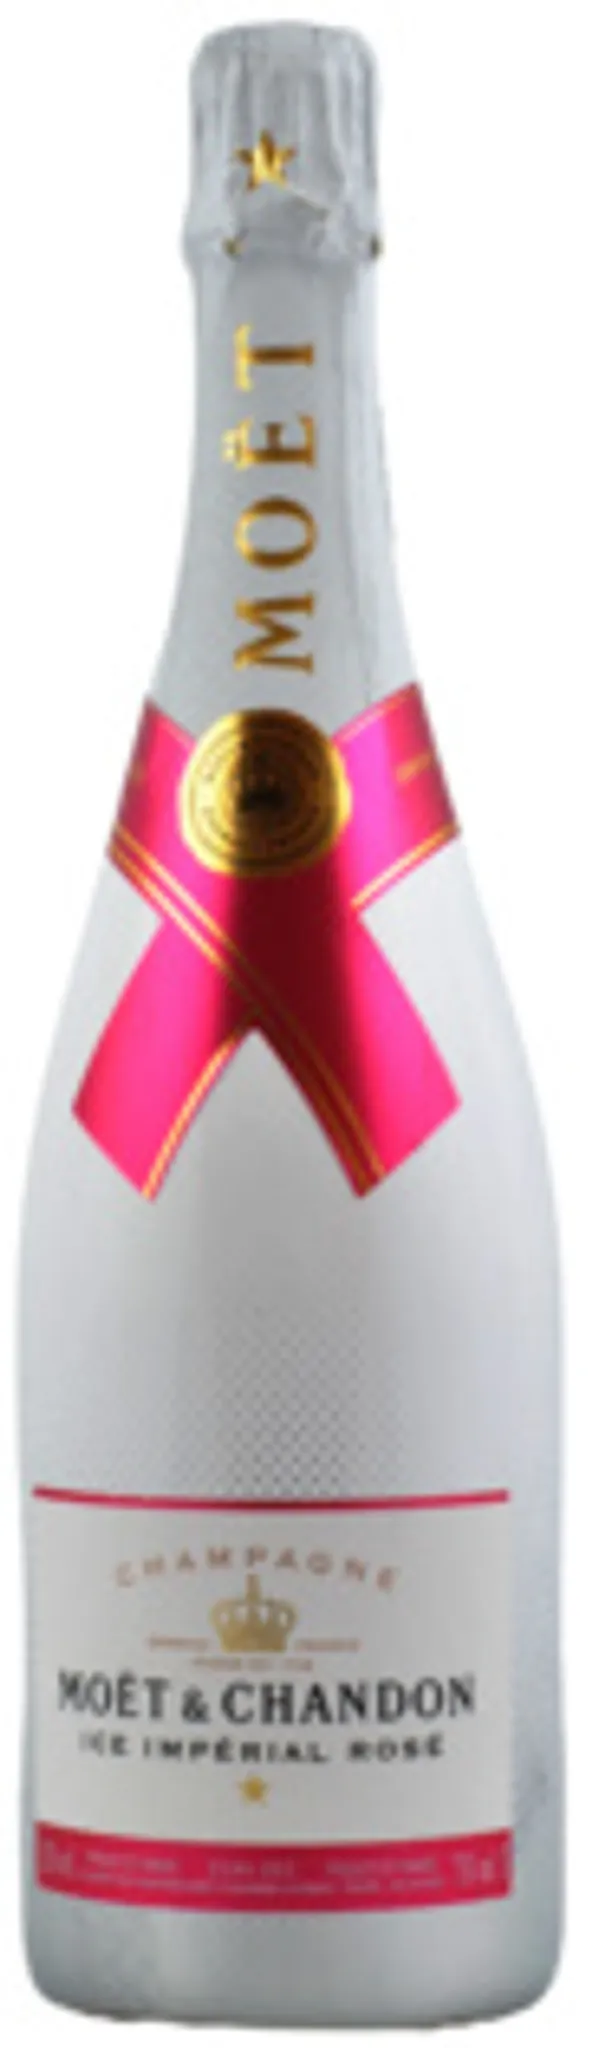 Moet Chandon Ice Imperial Rose Champagne 0.75l 12% Vol + 2 Rose